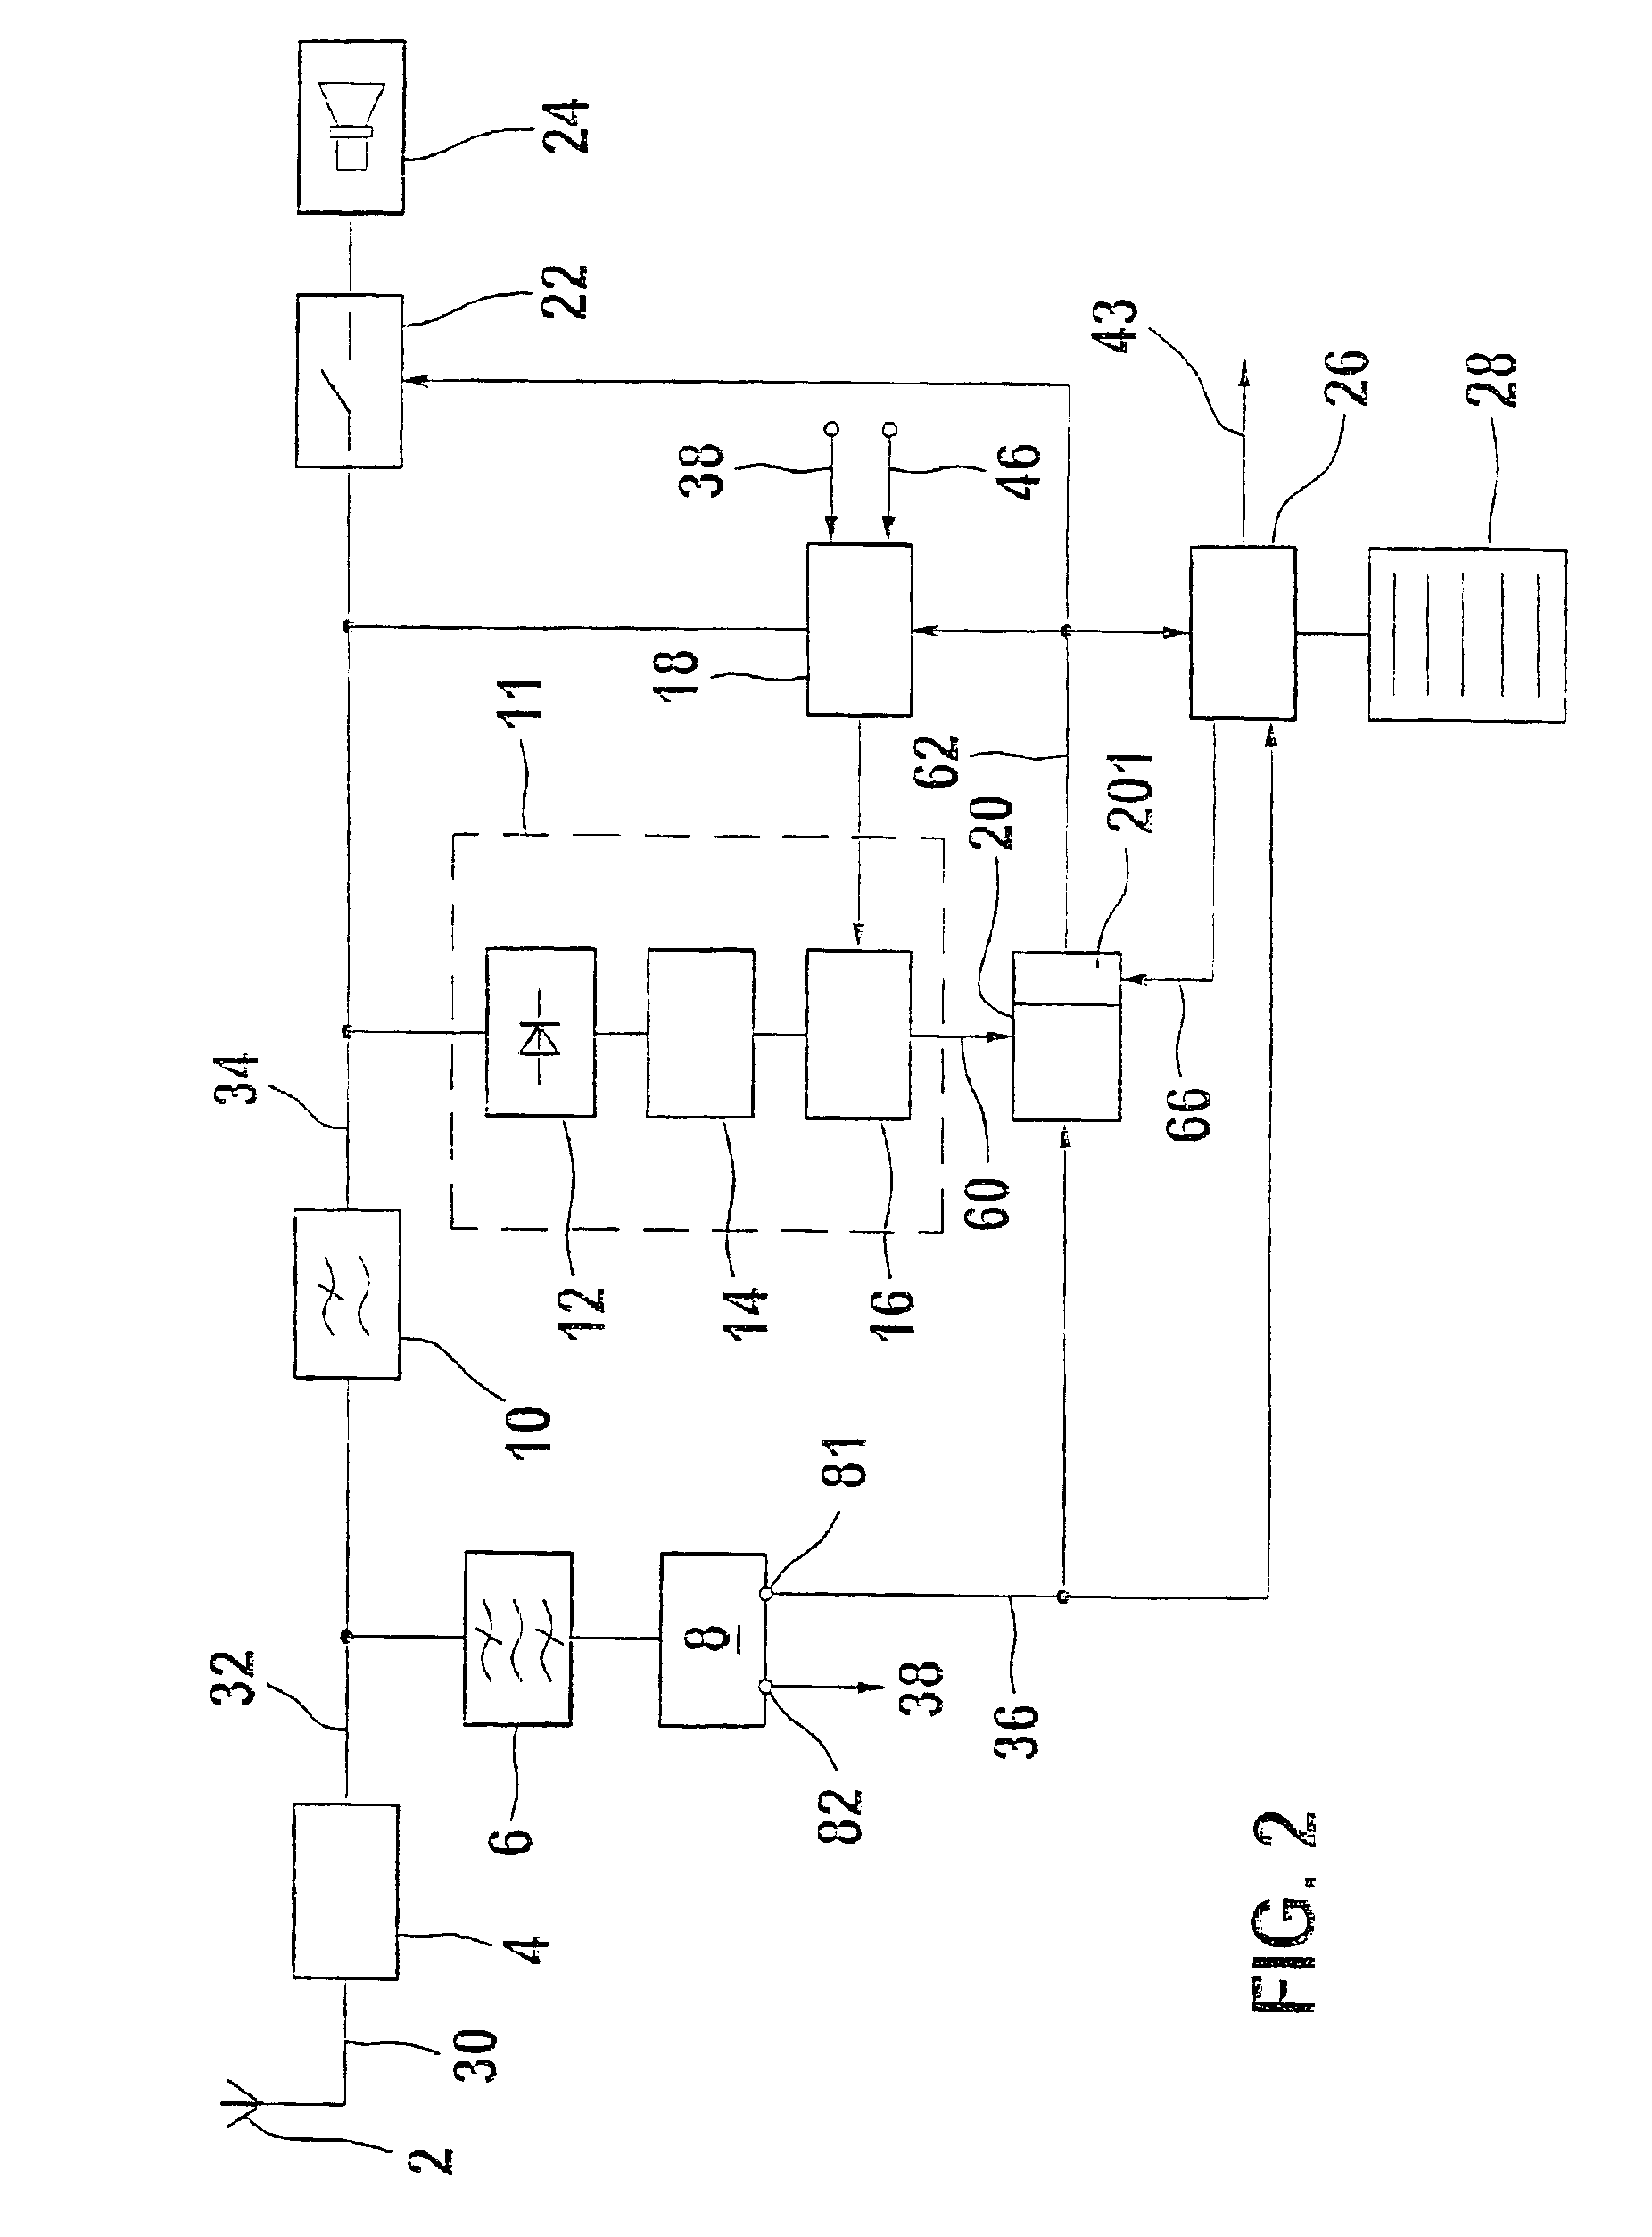 Method for masking interruptions on playback of received radio signals